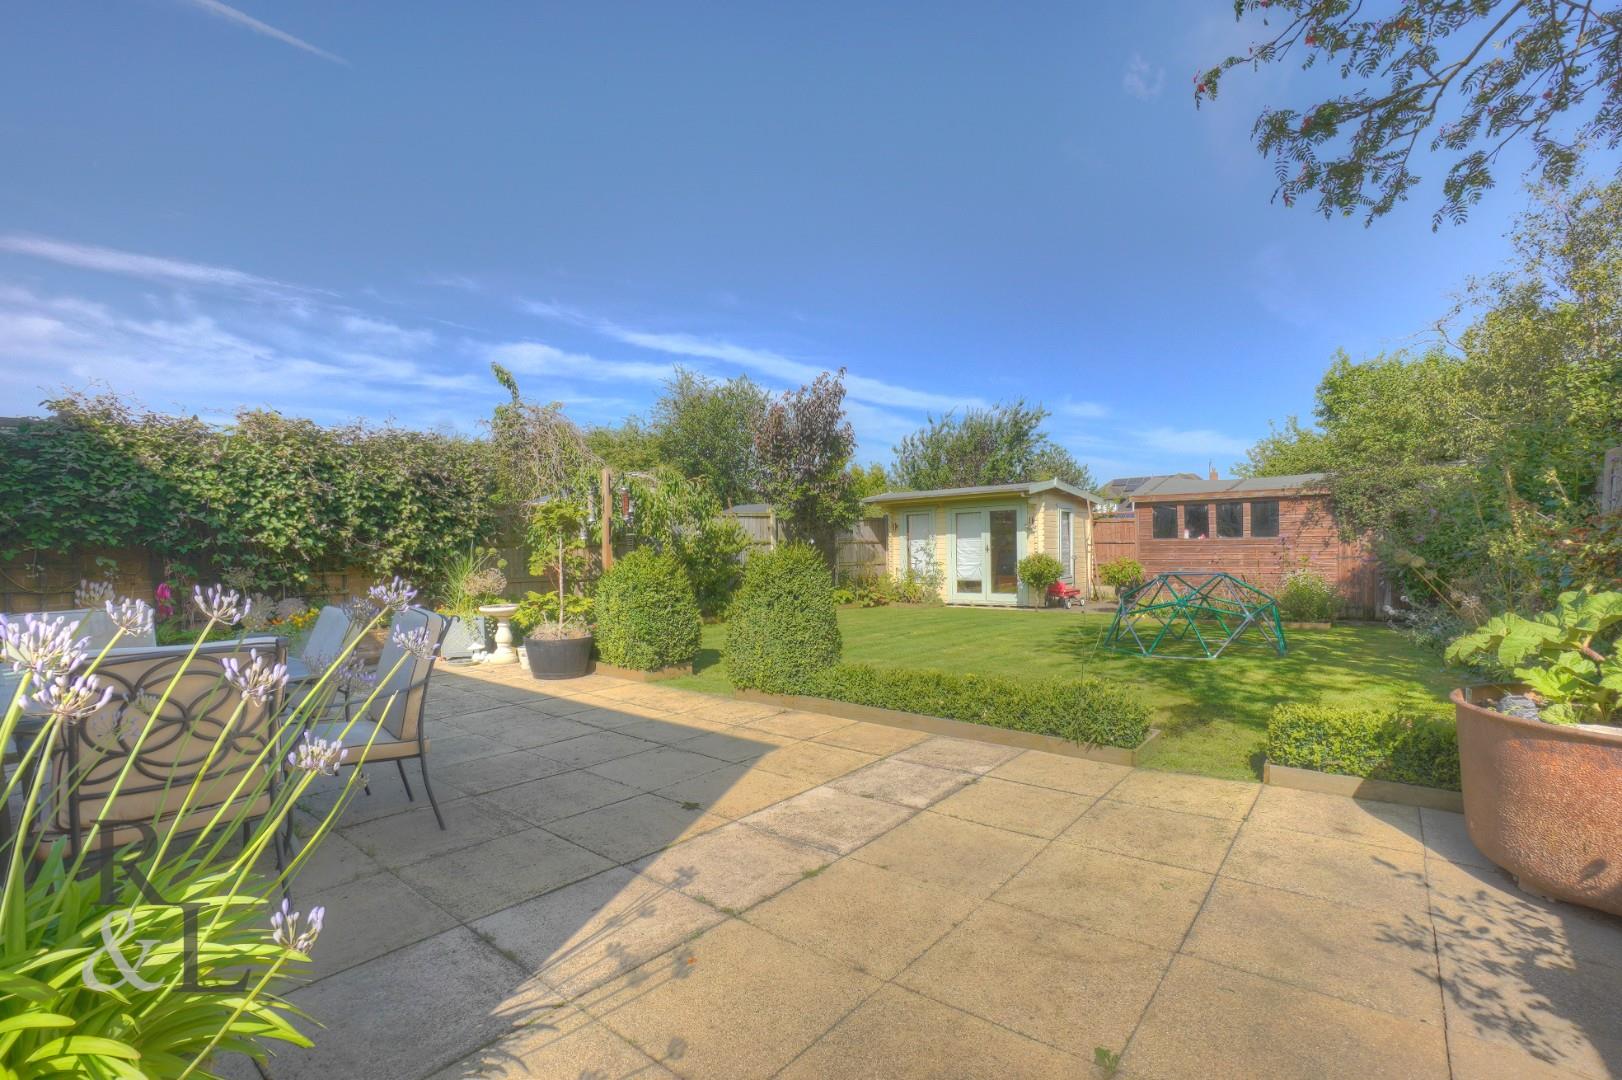 Property image for Meadow Drive, Keyworth, Nottingham